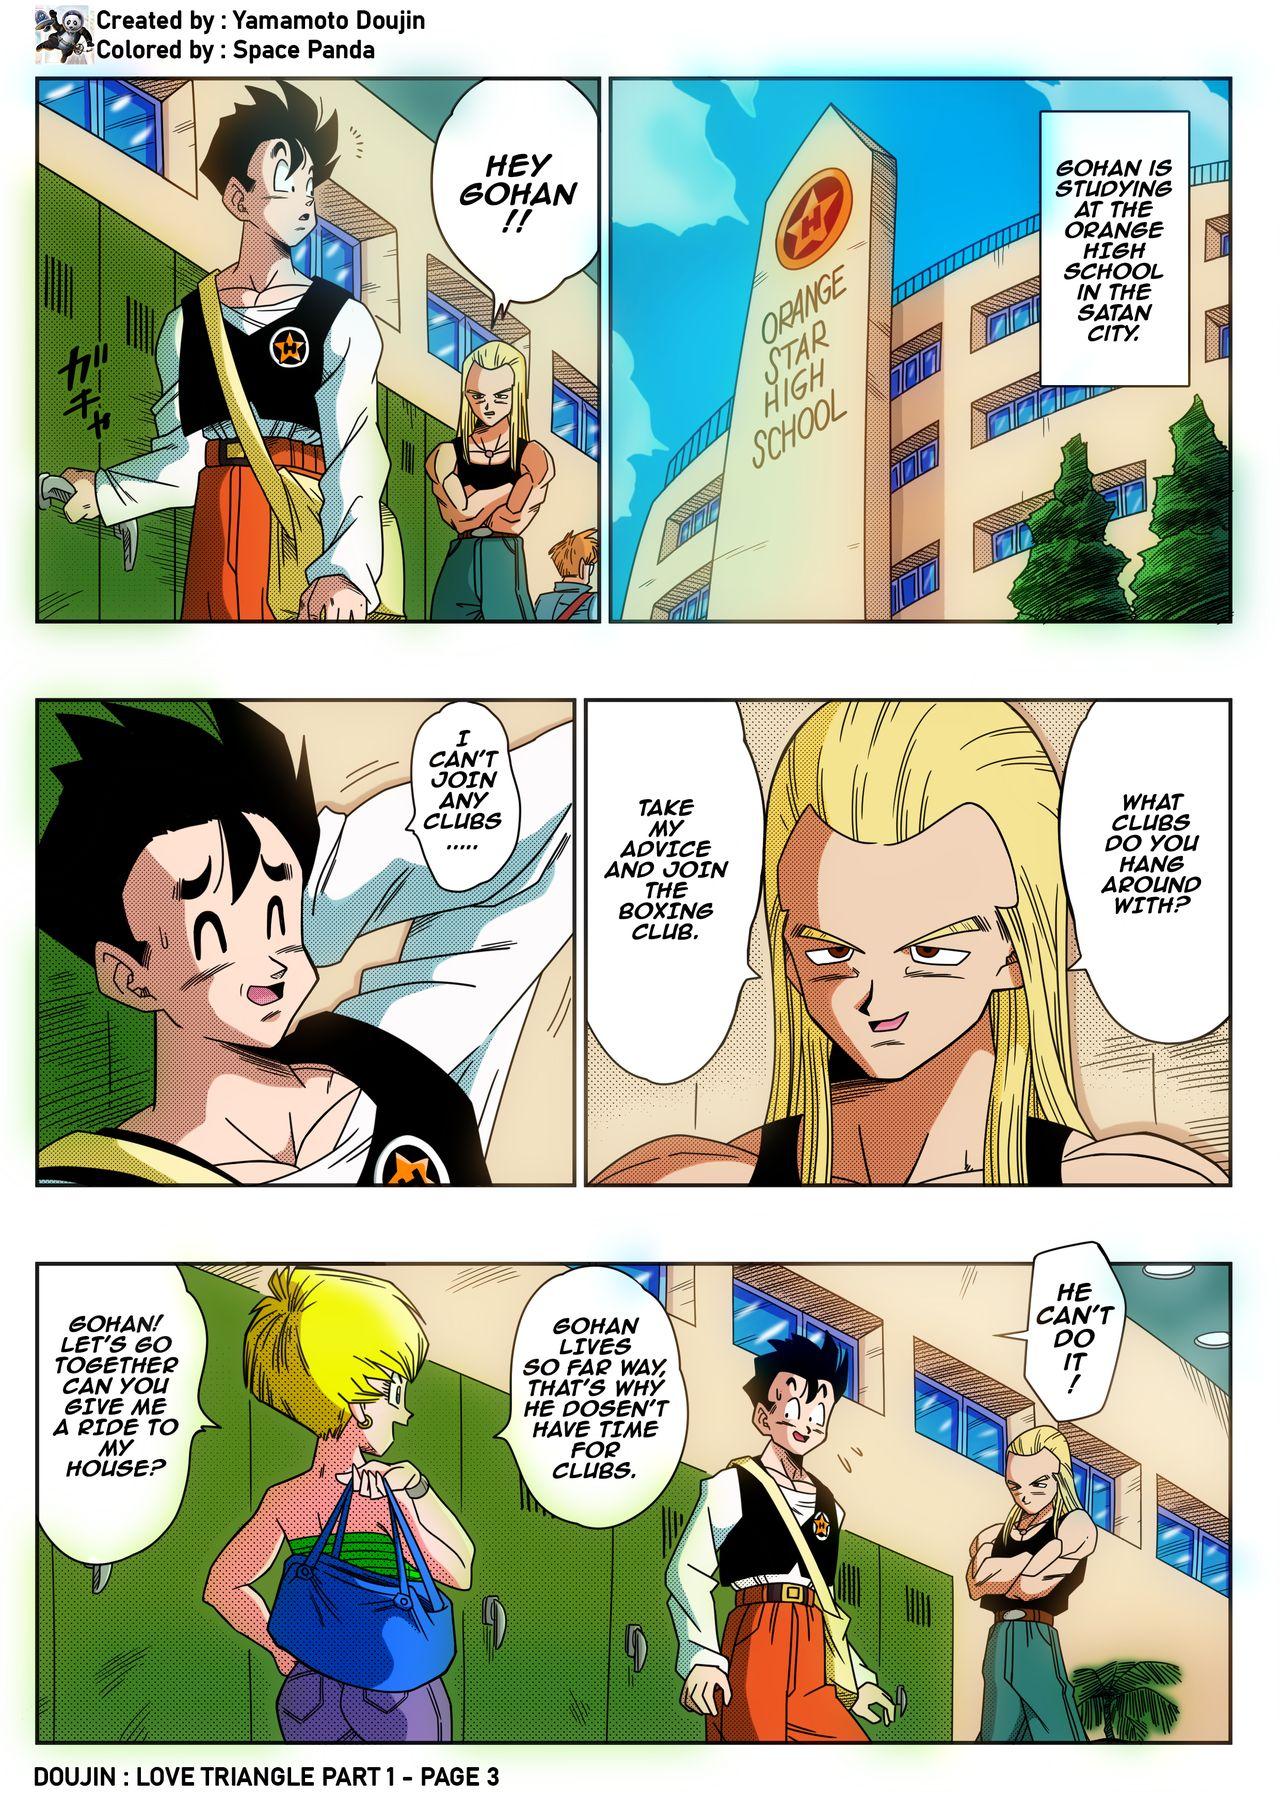 Girlongirl Love Triangle - Part 1 - Dragon ball z Gay Emo - Page 3